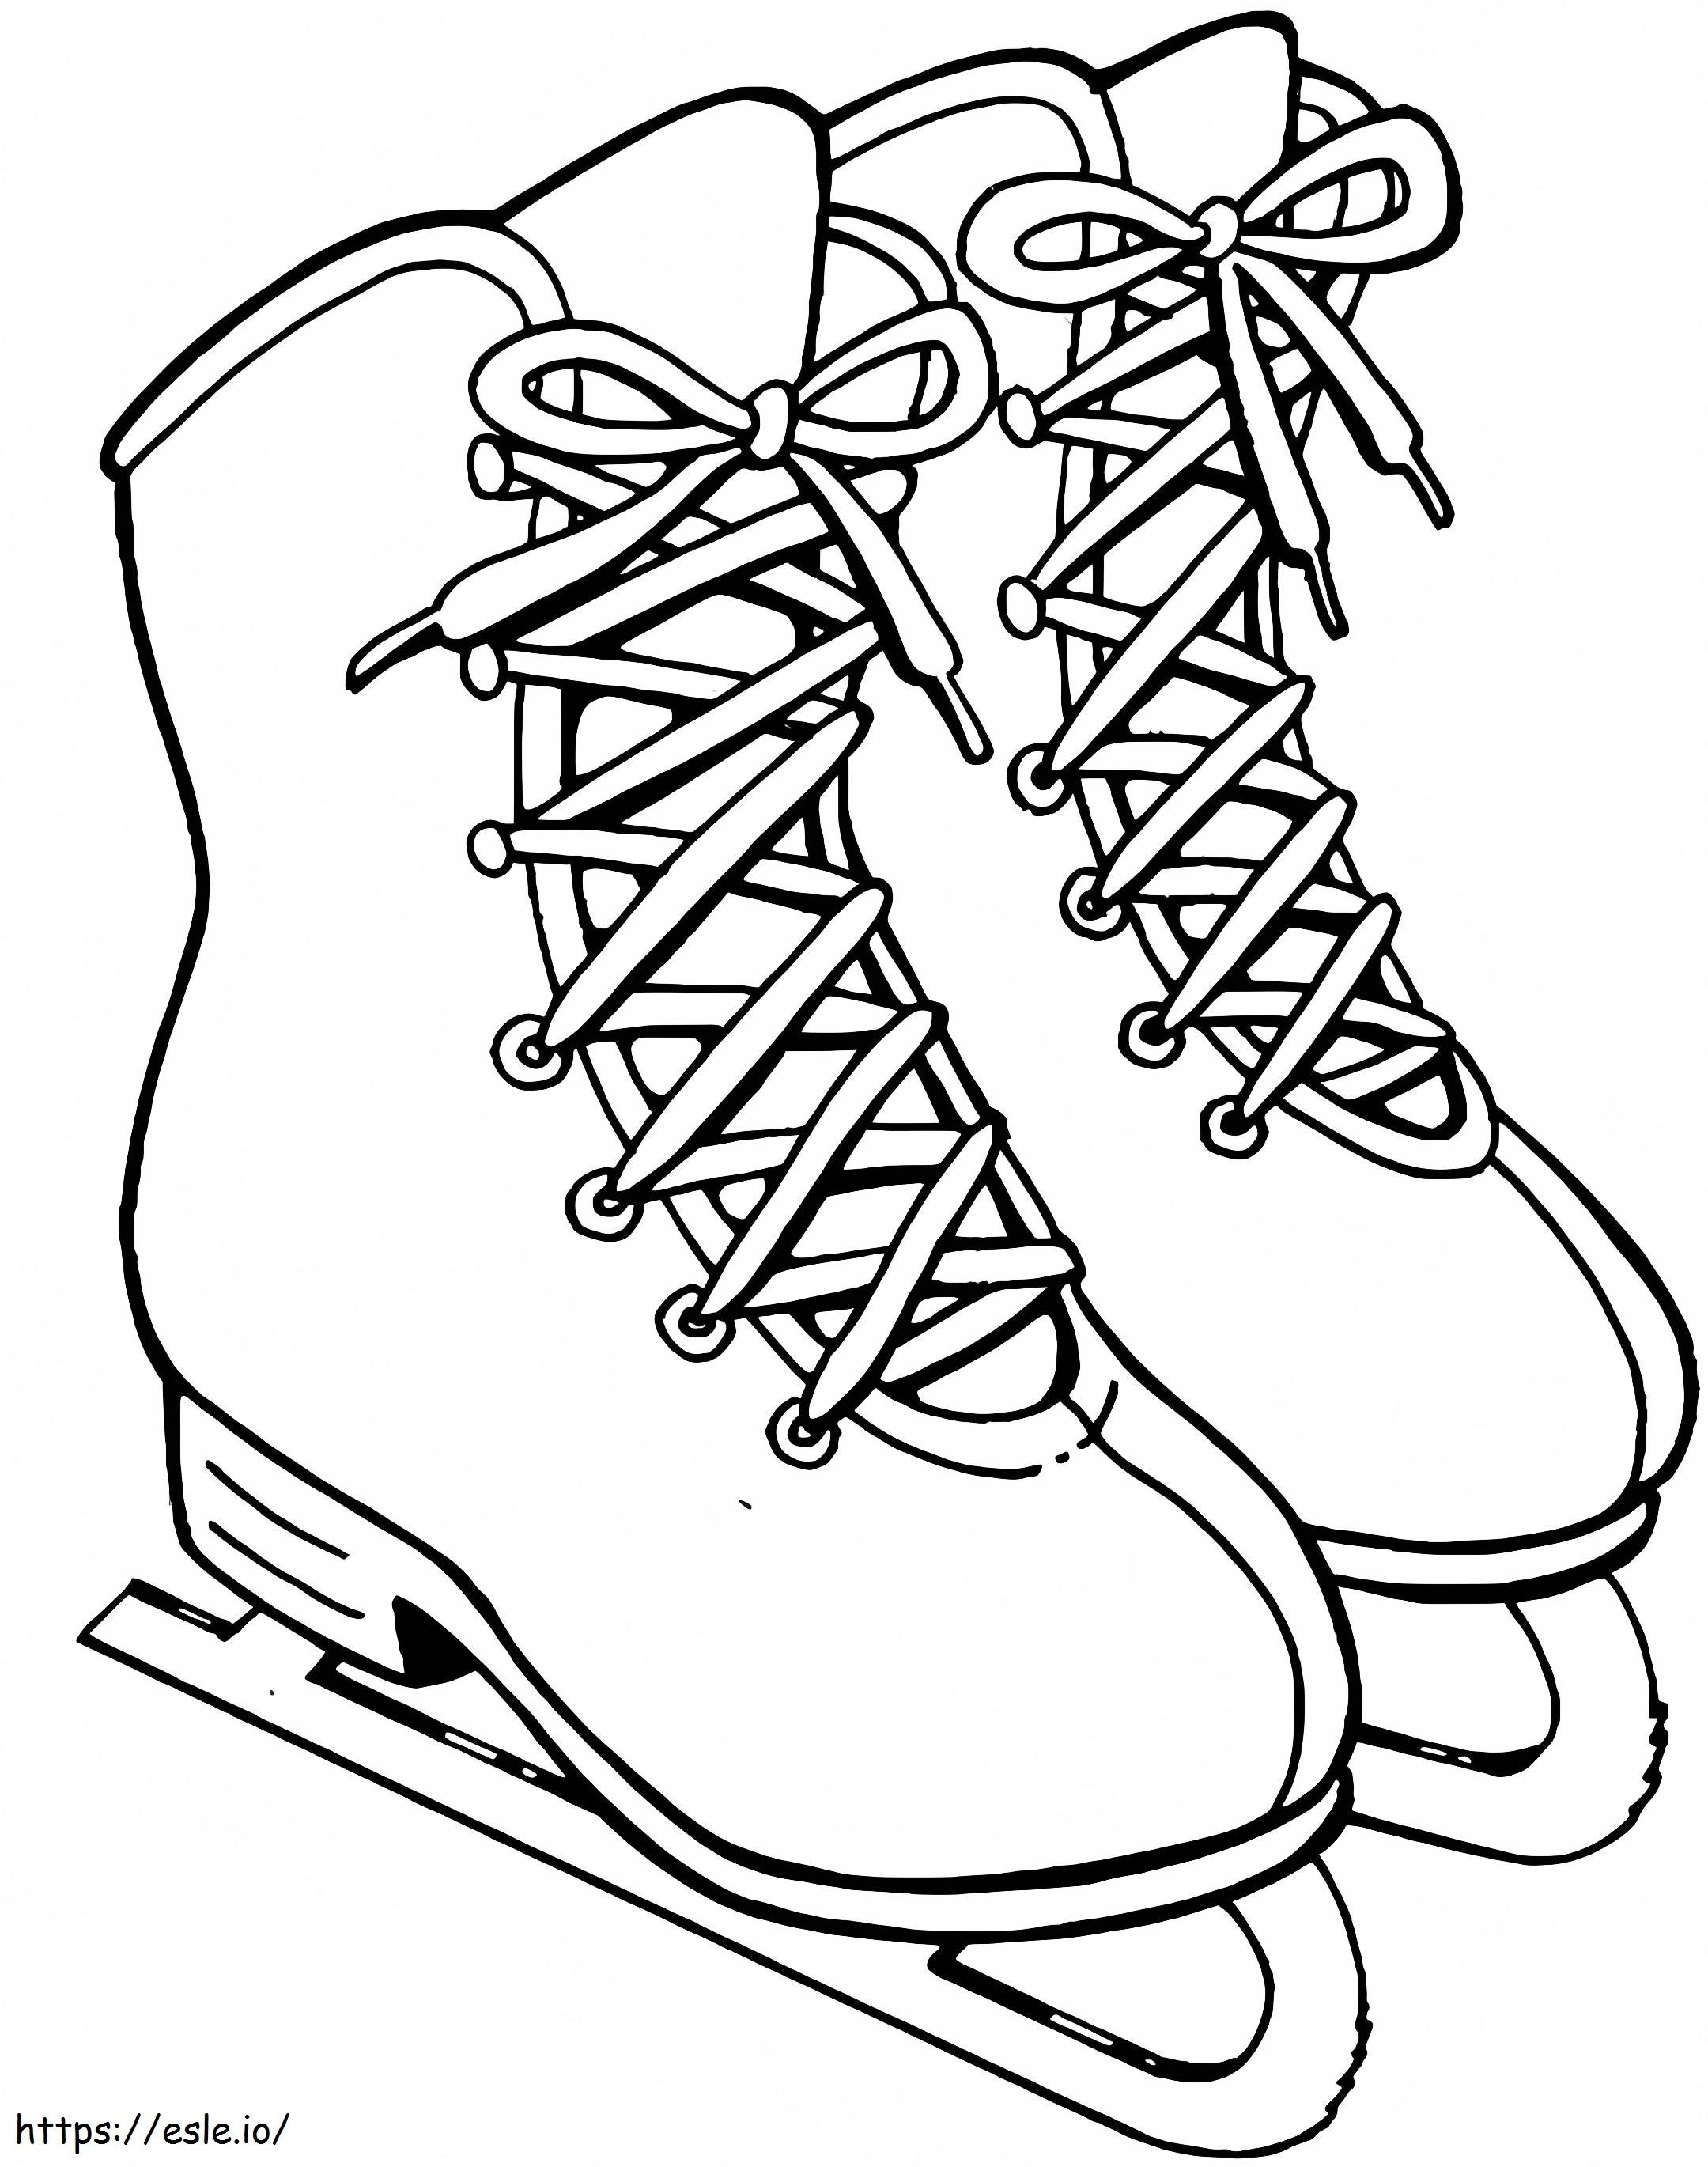 Ice Skating Shoes coloring page